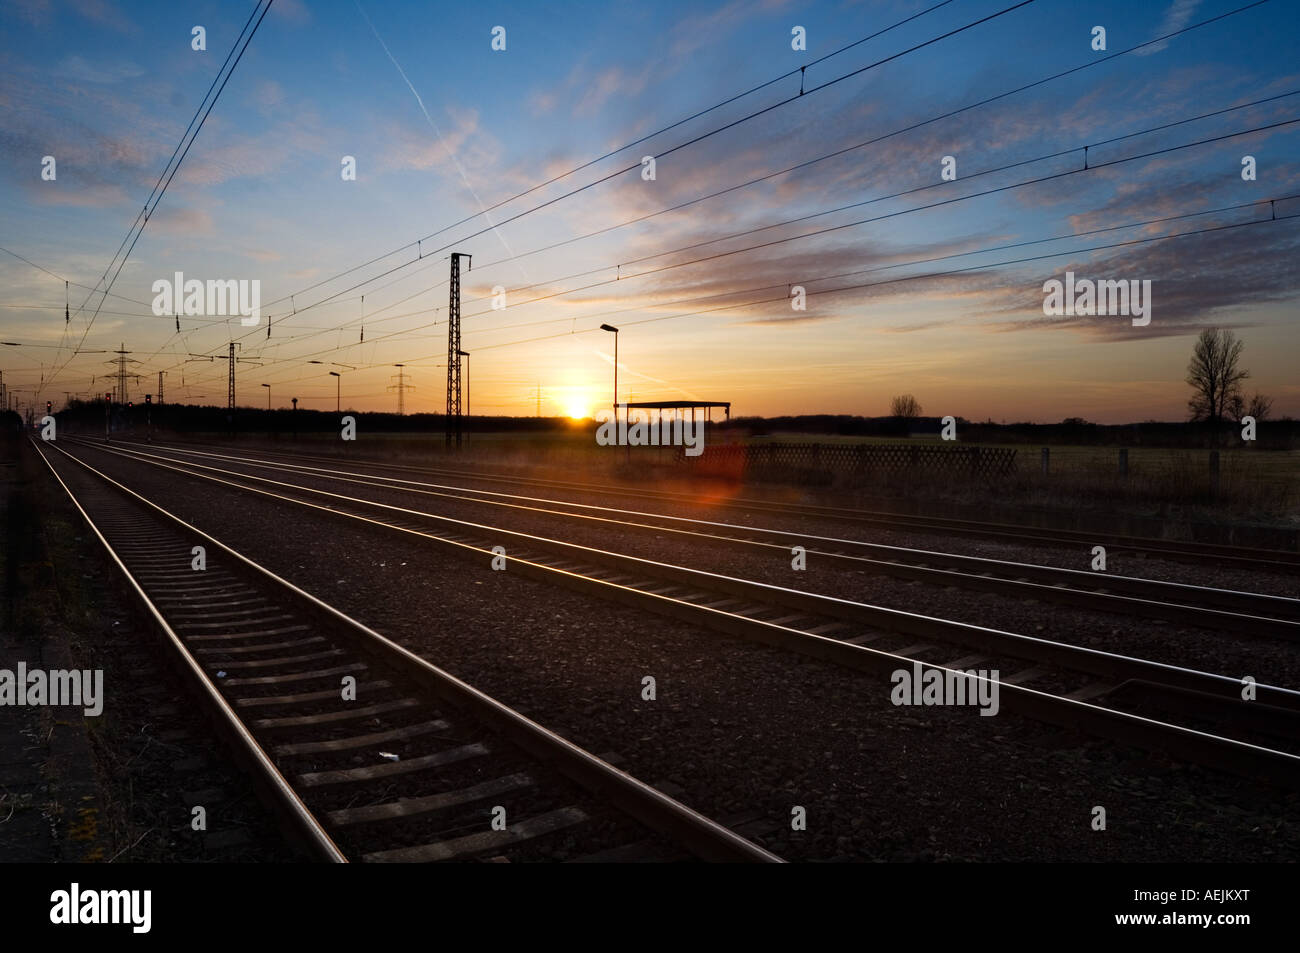 Electrified railroad line in the evening Stock Photo